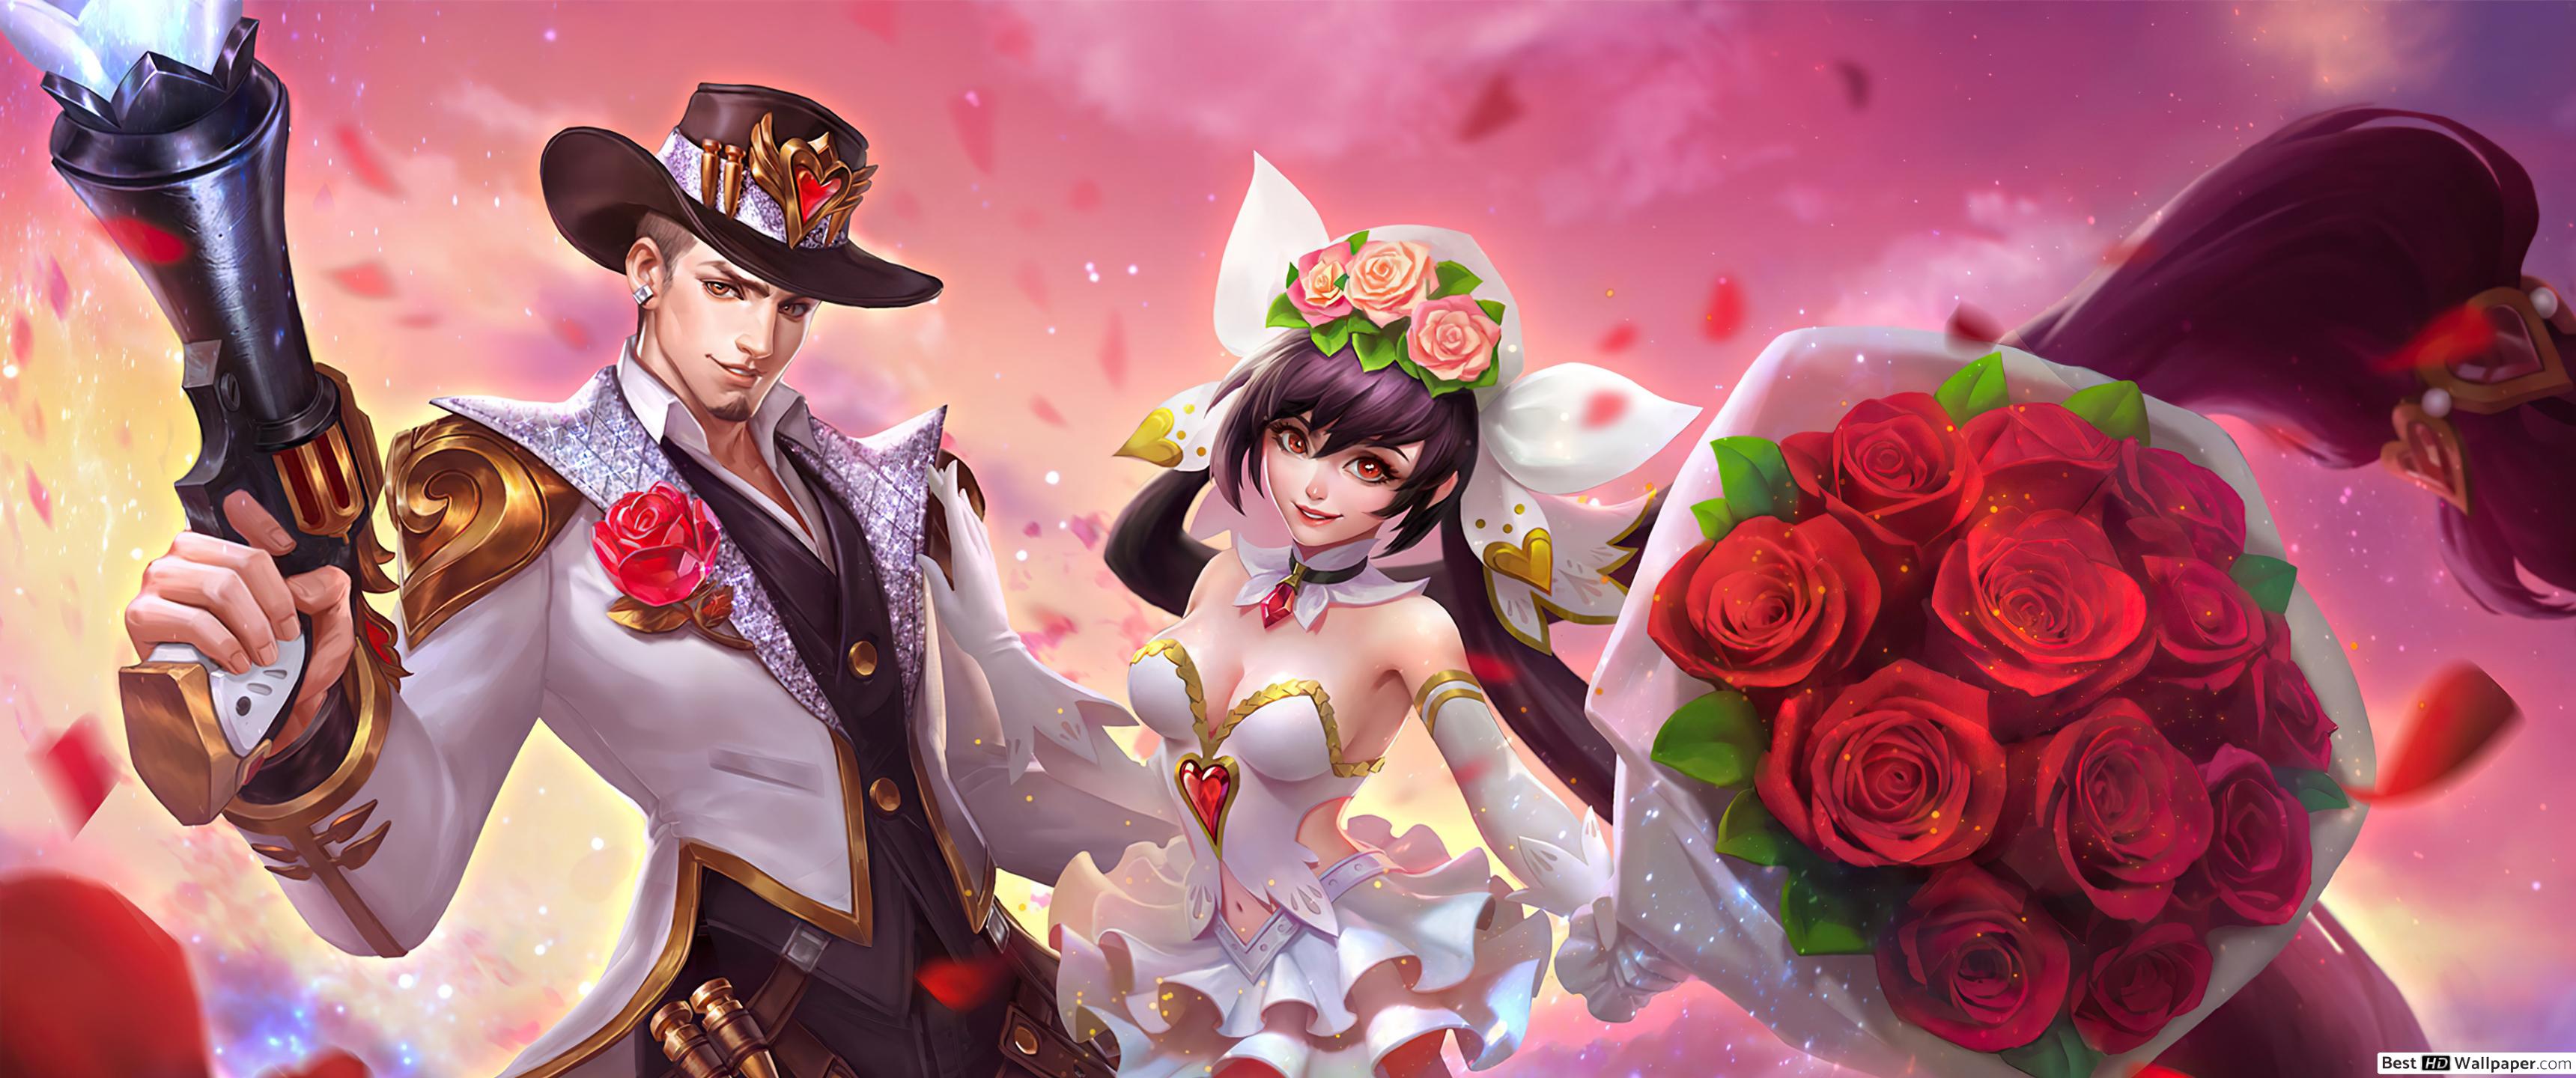 Guns and Roses 'Clint' with Canon and Roses 'Layla' Legends [ML] HD wallpaper download